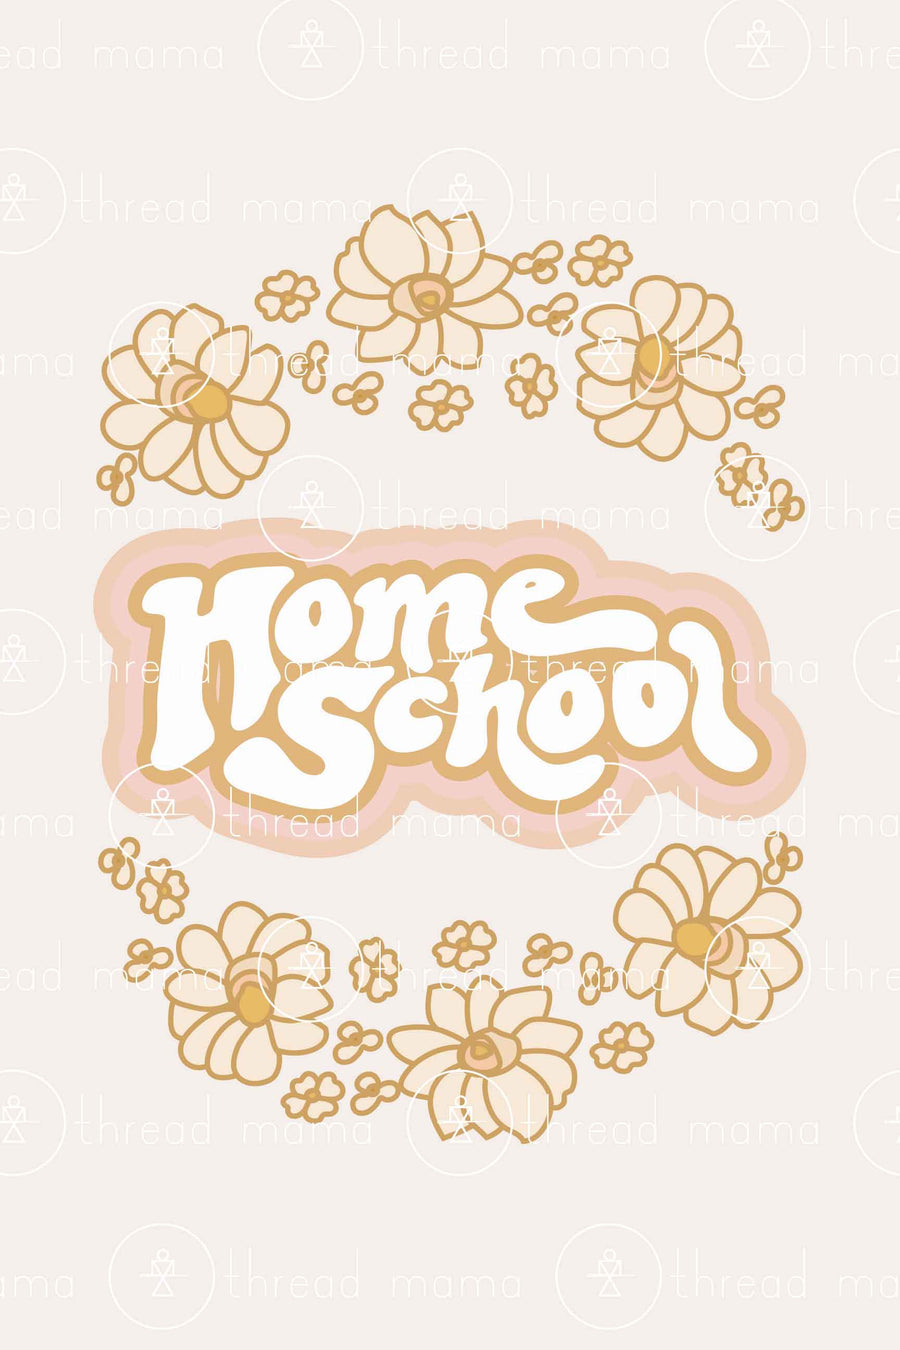 Home Sweet Home School - 2 Piece (Printable Poster)